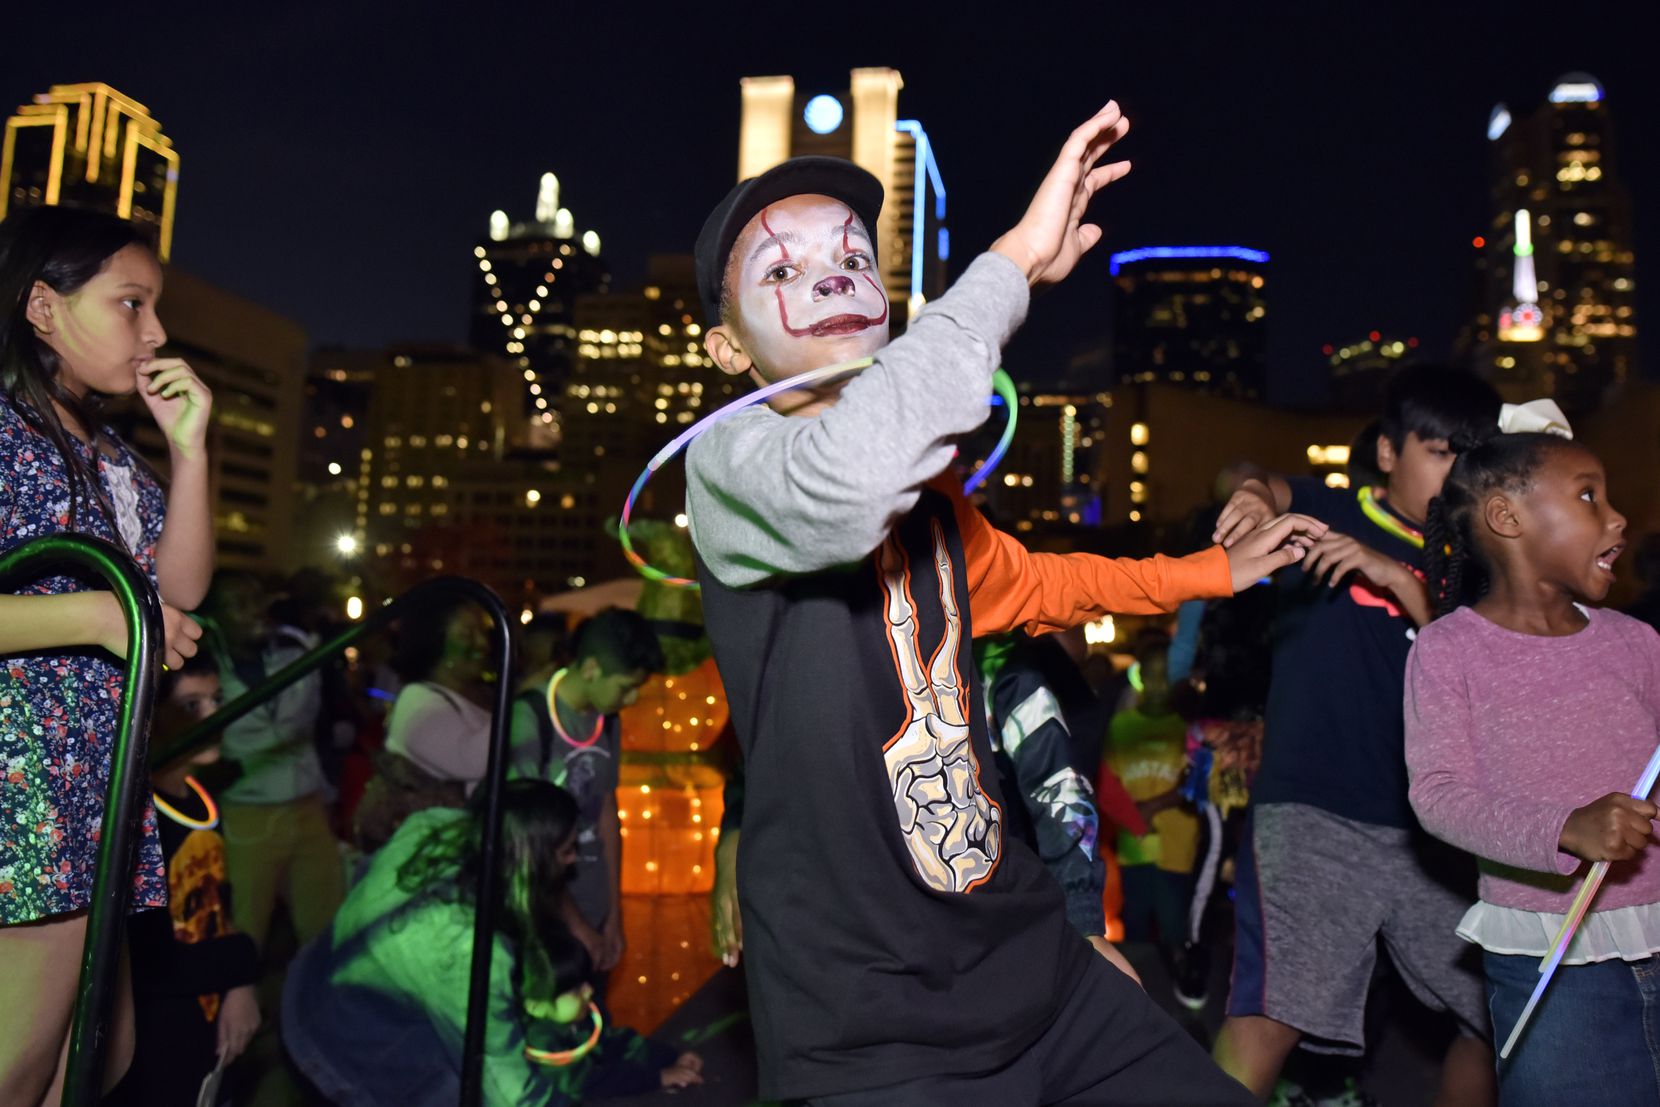 At last year’s Pumpkins of the Plaza party, Trikee Ross, wearing face paint and a glow...